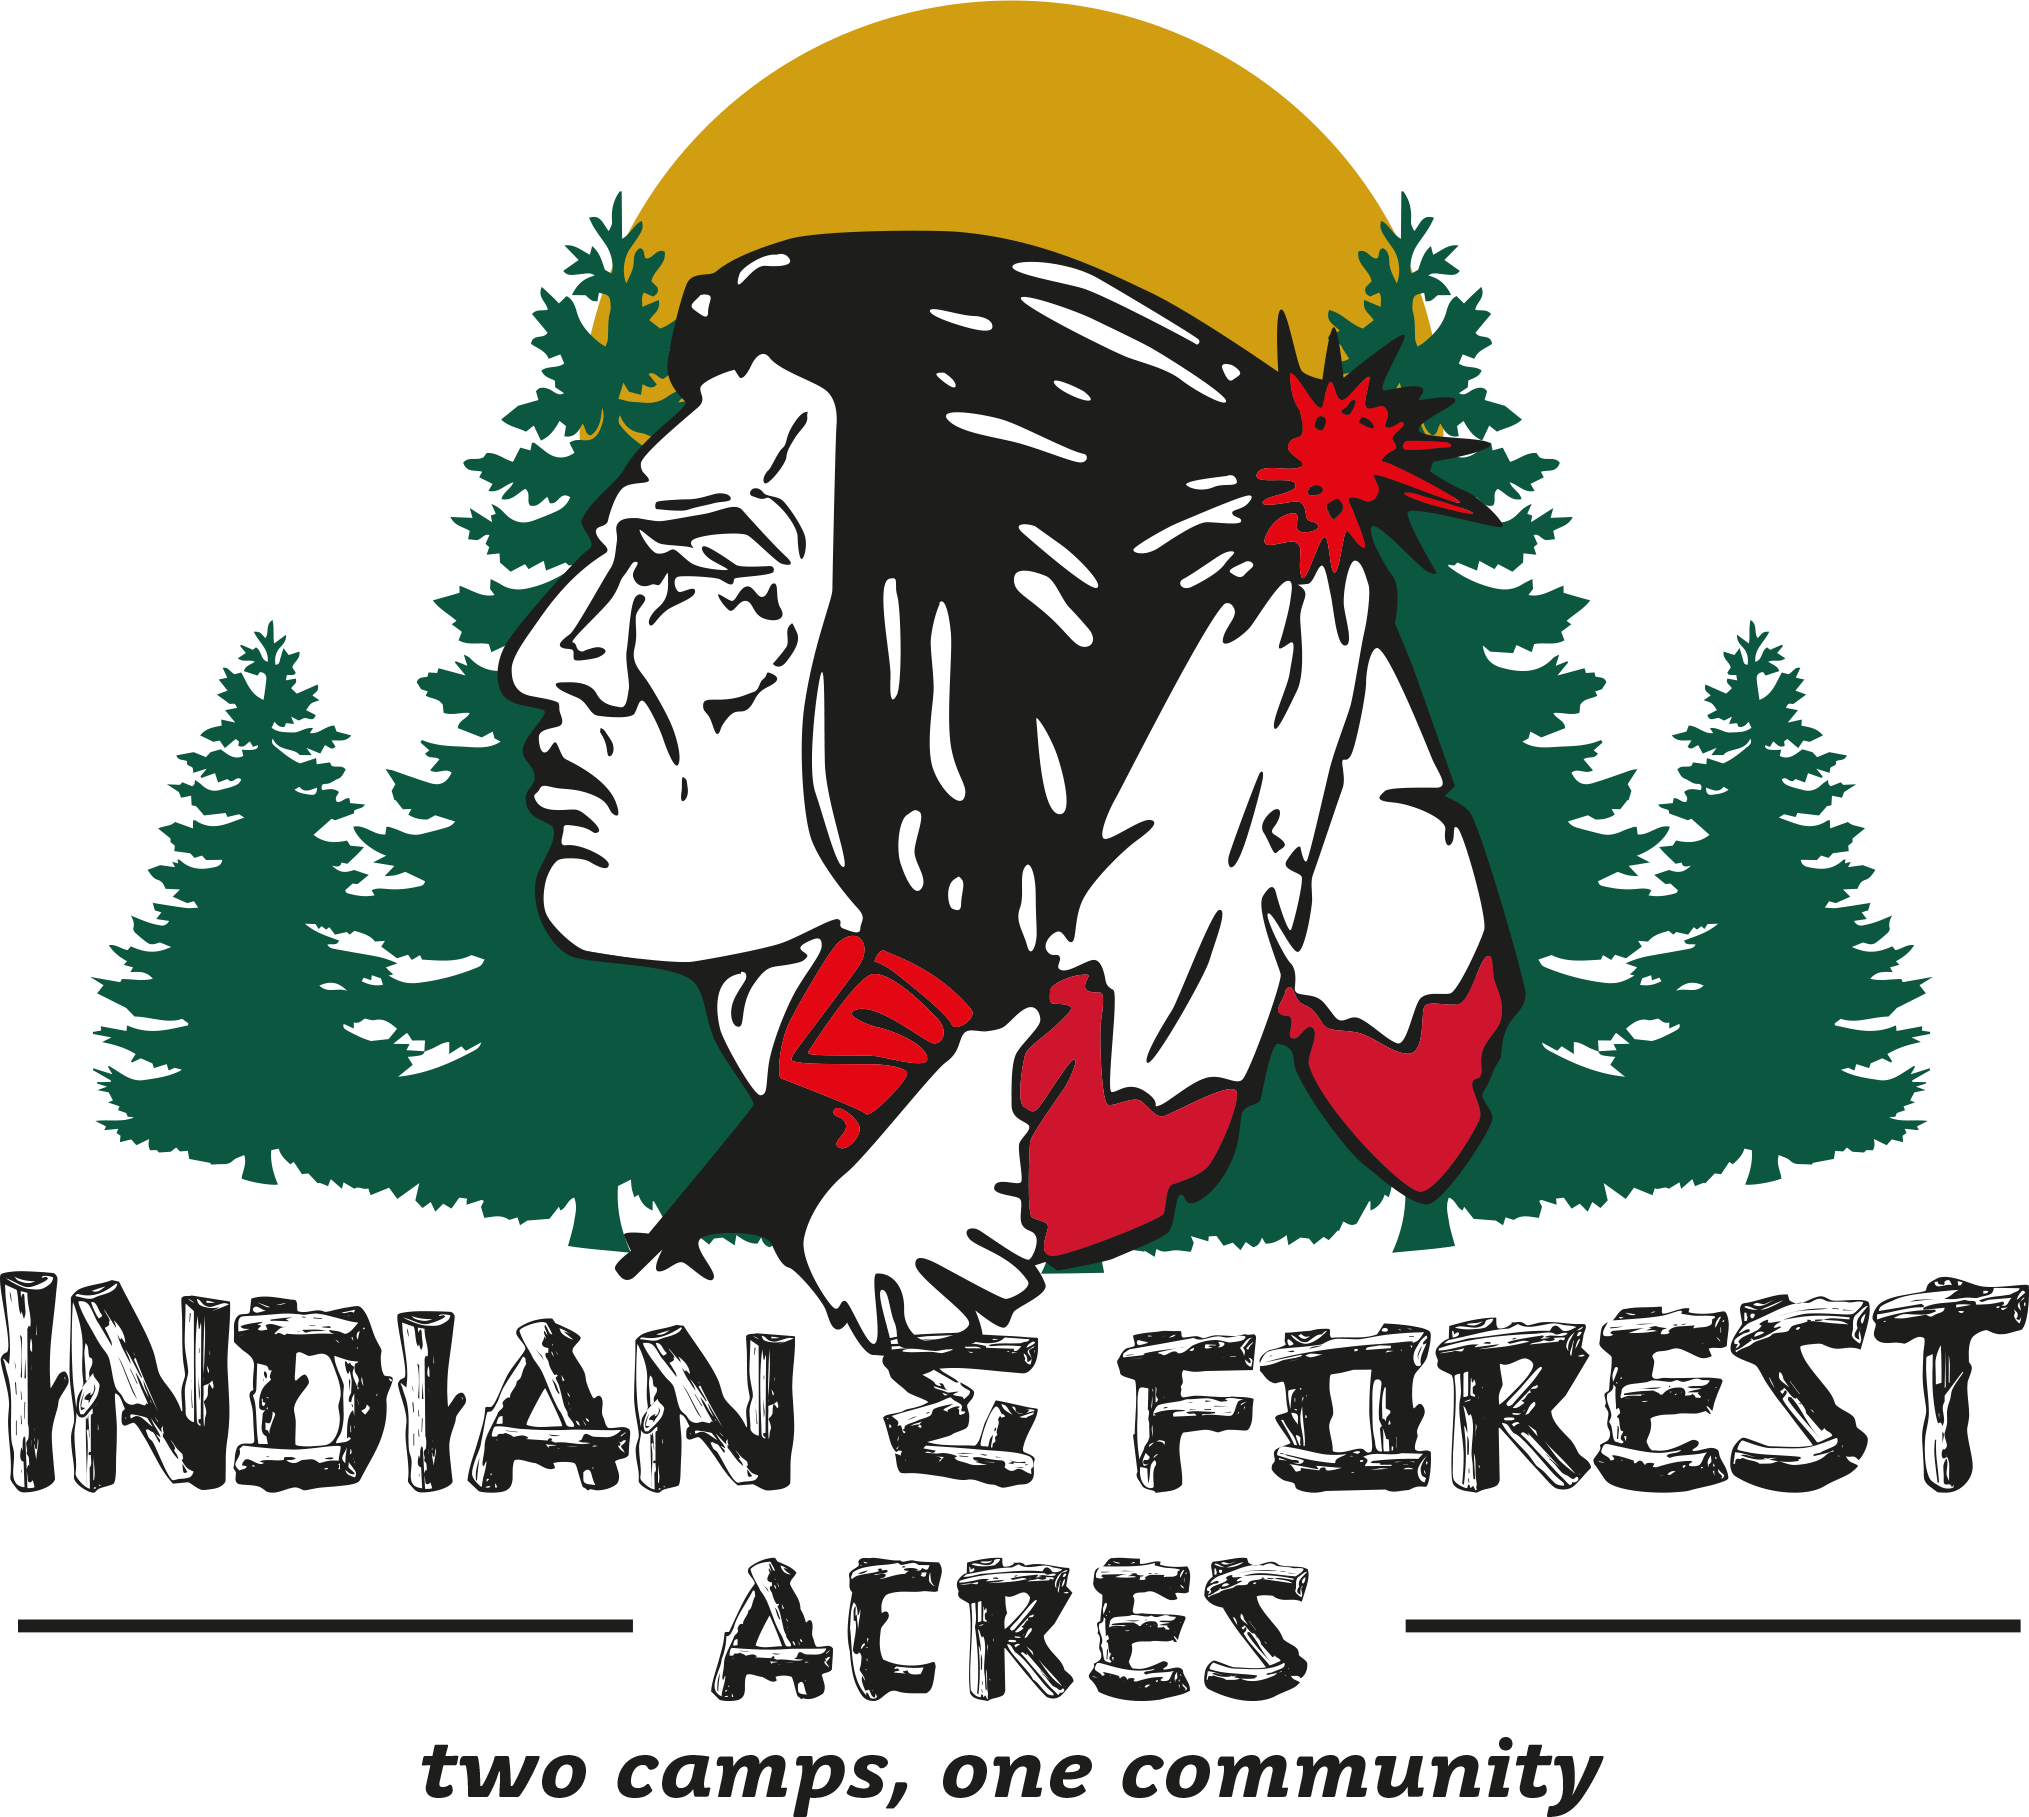 Indian and Forest Acres